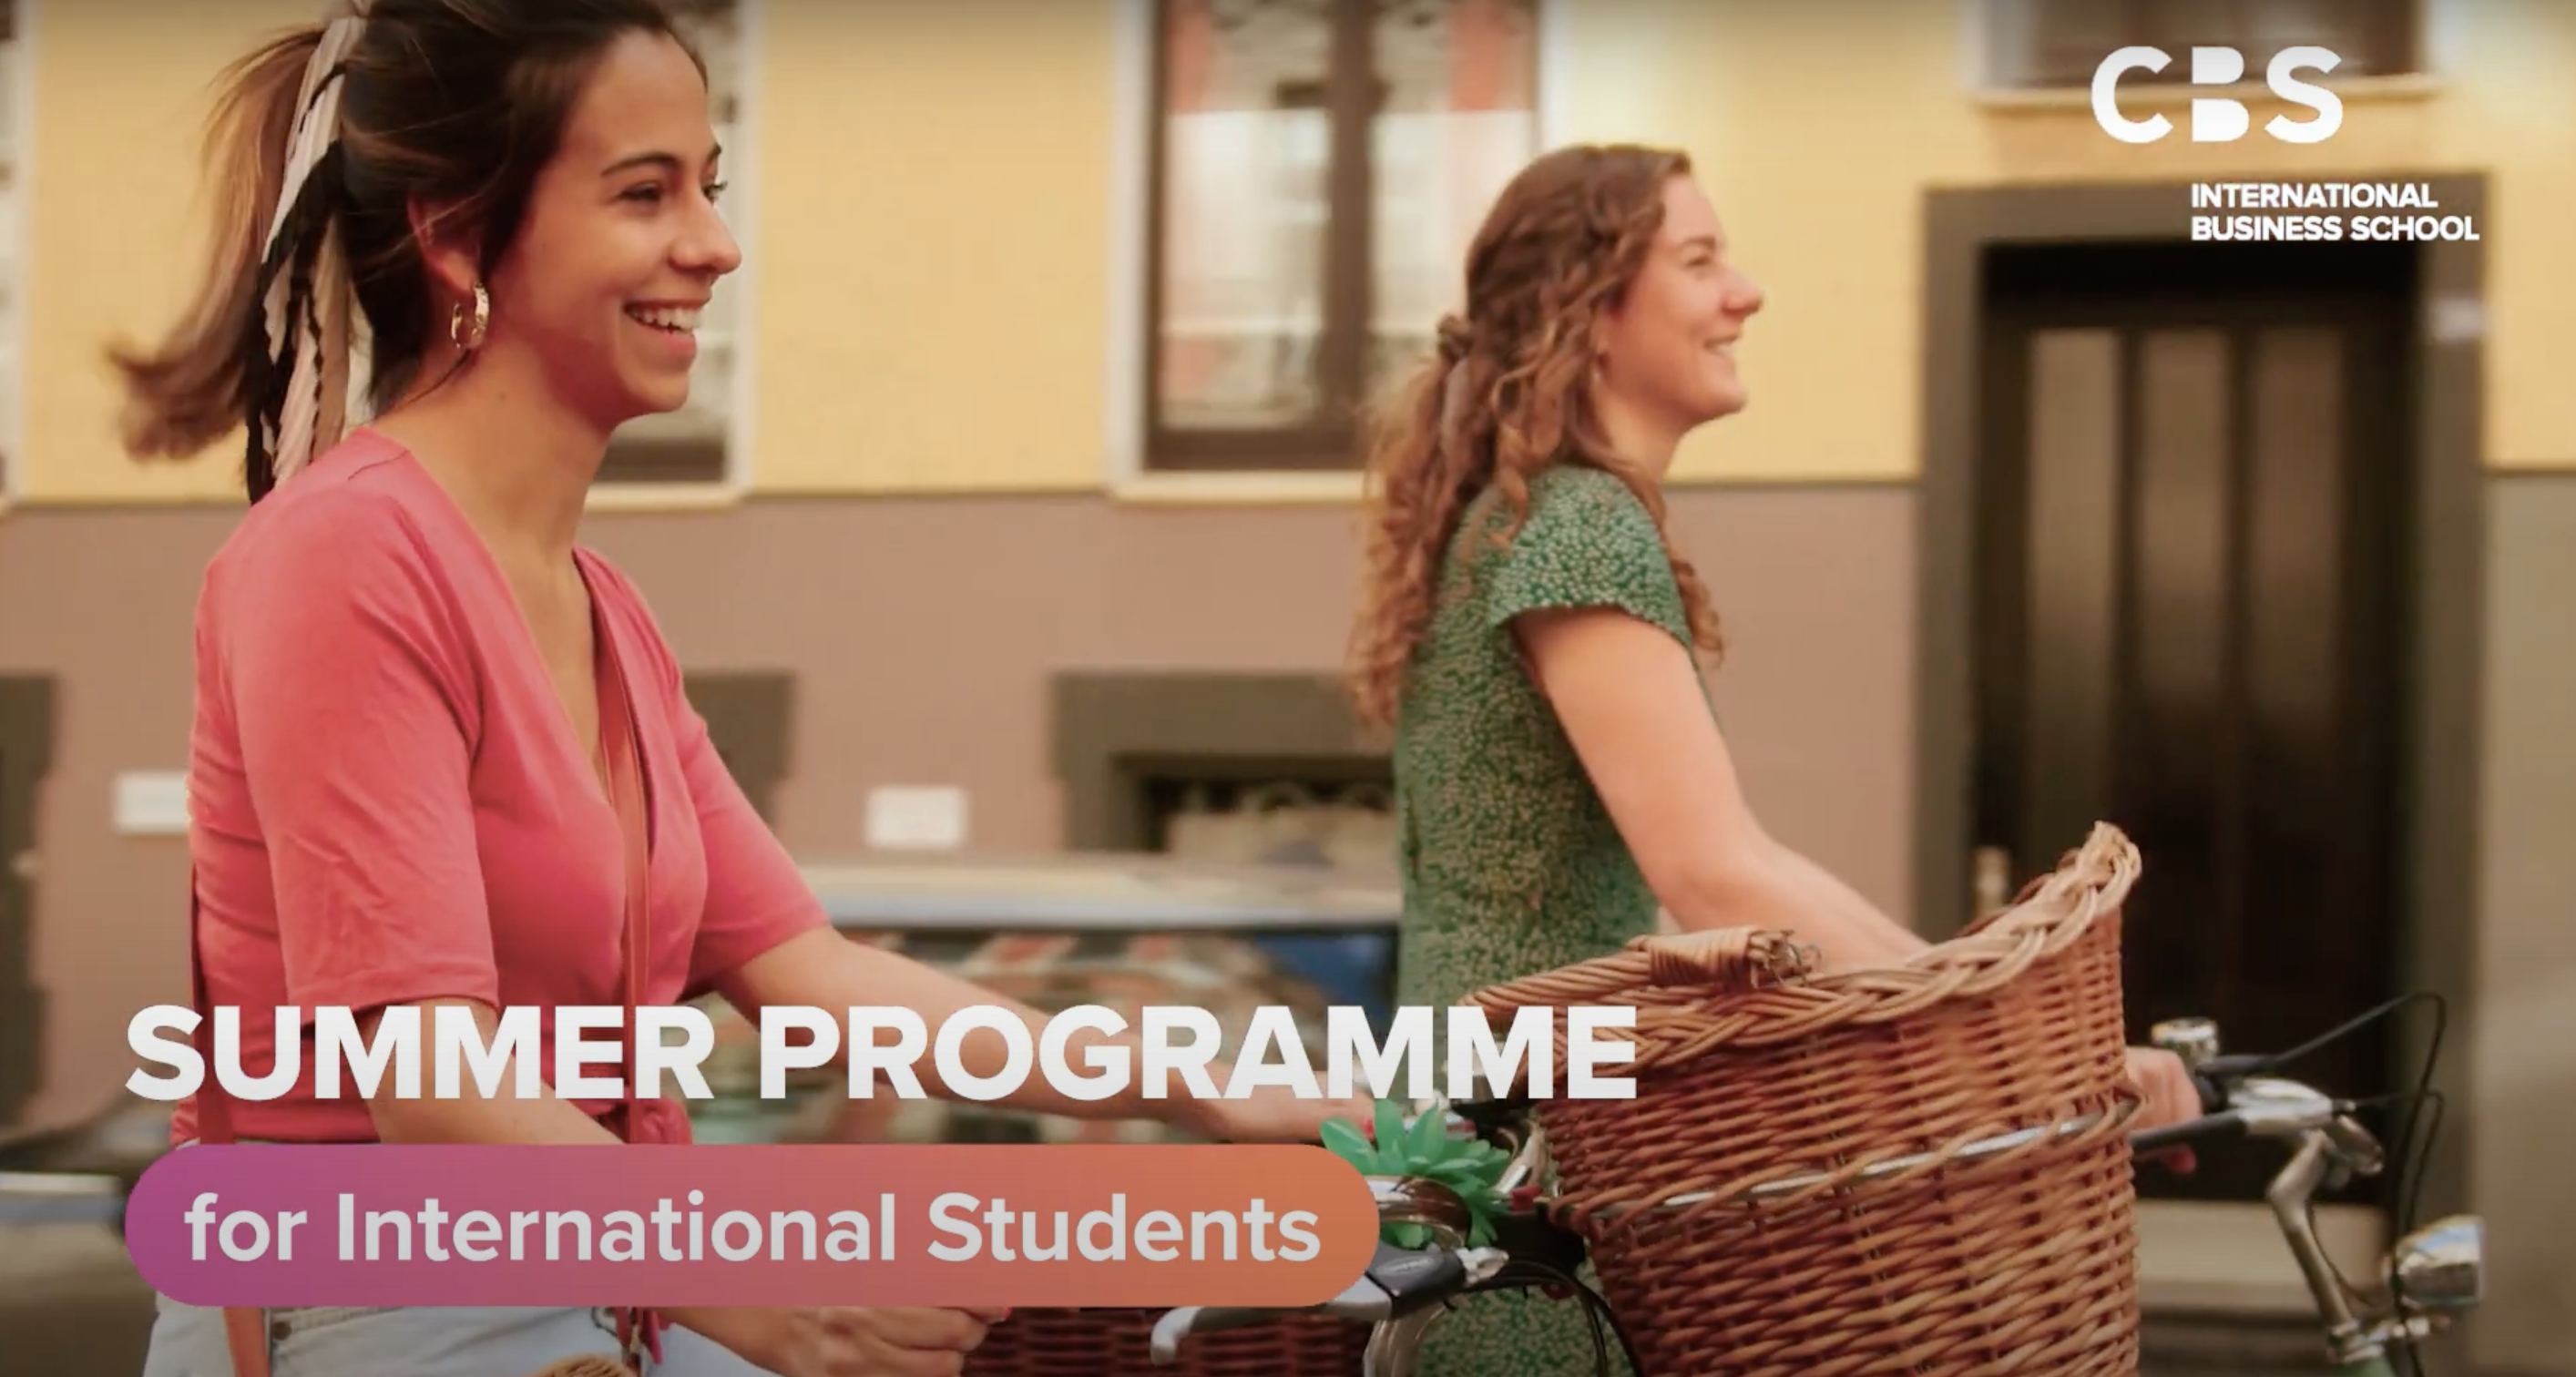 Summer Programme for International Students at CBS in Cologne